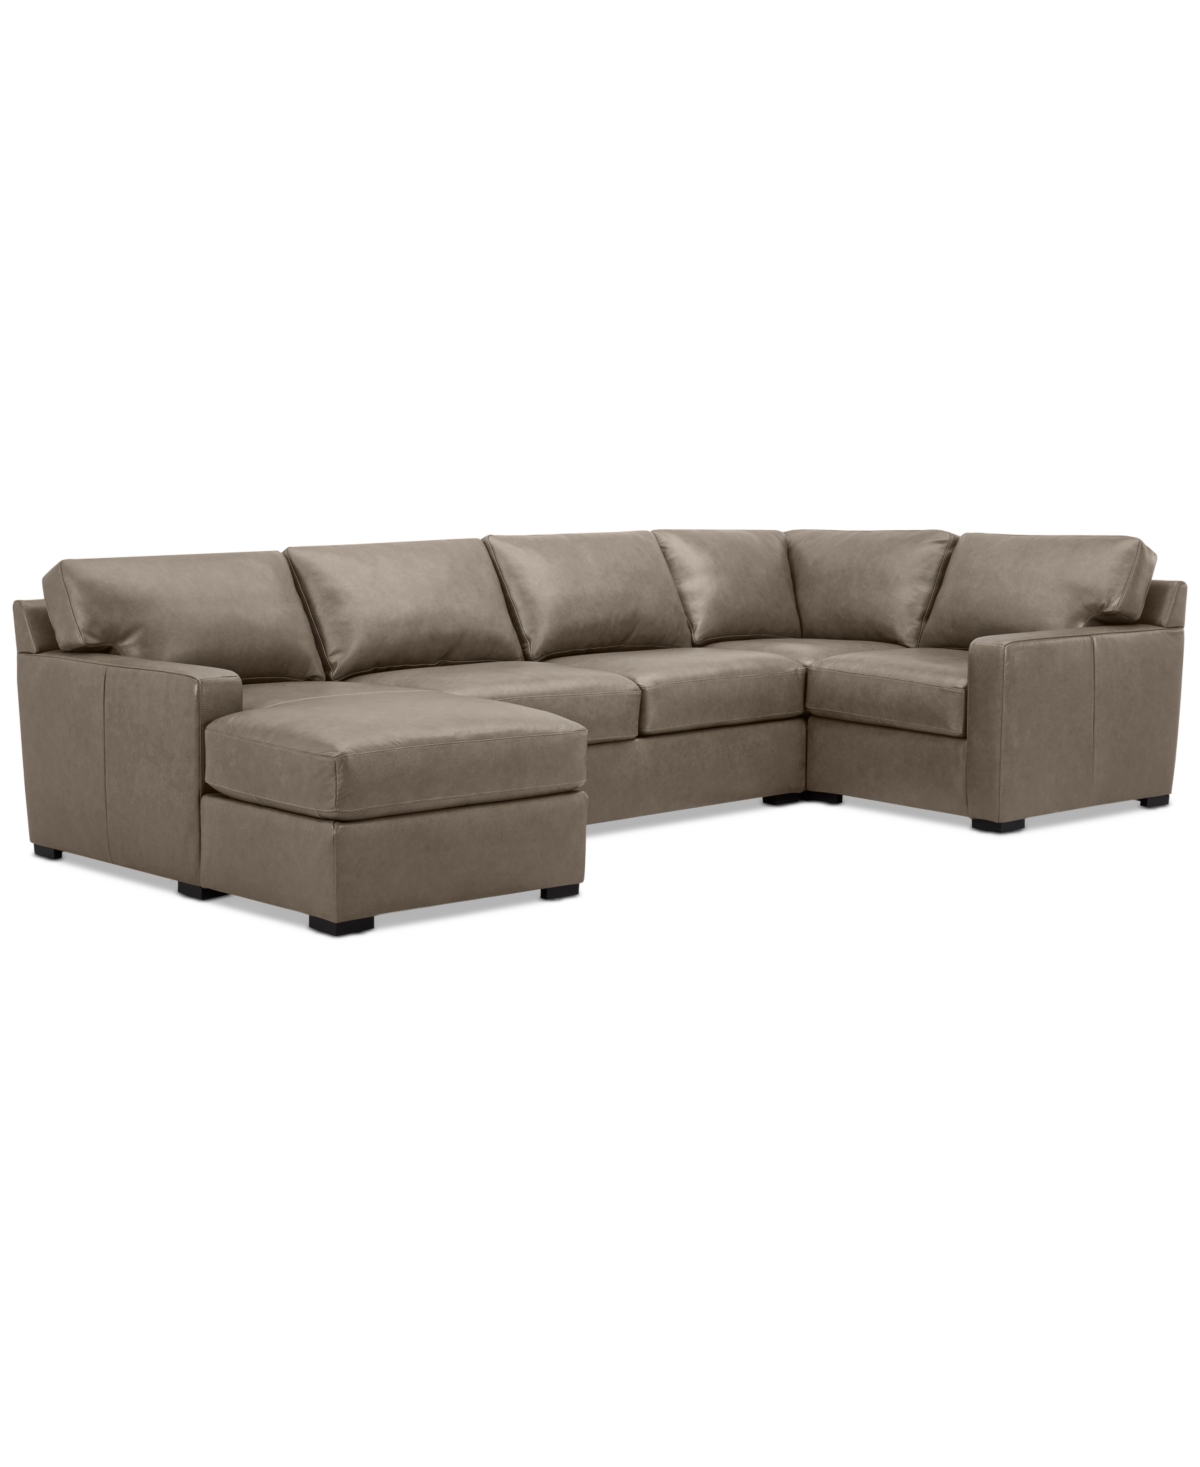 Macy's Radley 136" 4-pc. Leather Square Corner Modular Chaise Sectional, Created For  In Medium Brown